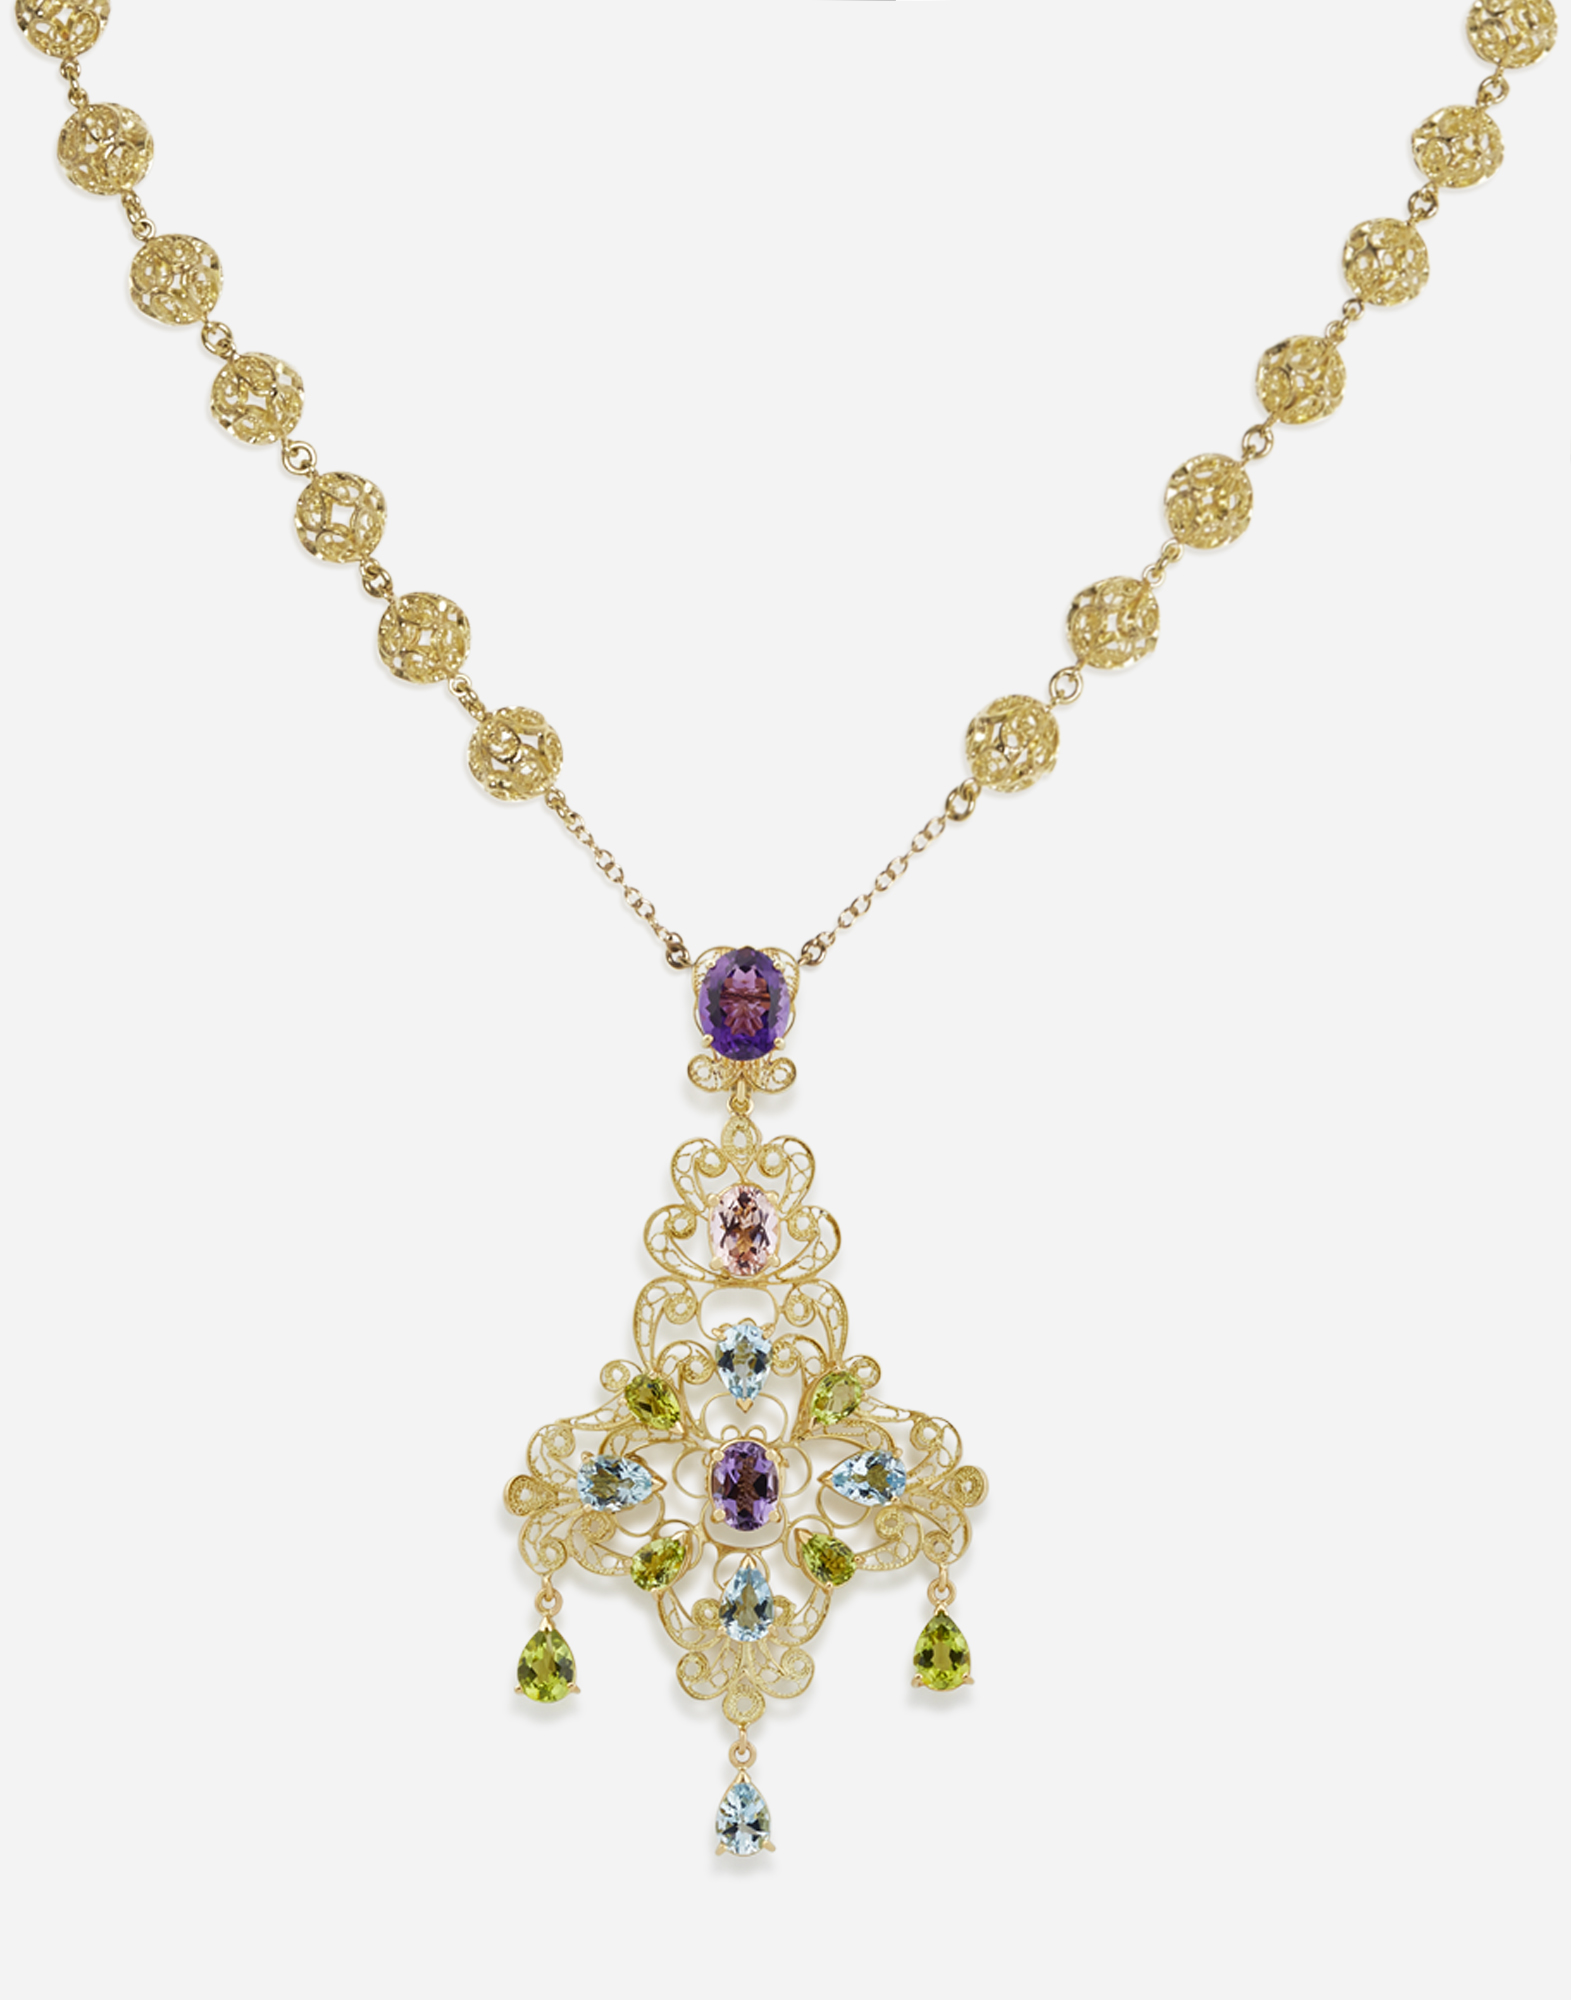 Shop Dolce & Gabbana Pizzo Necklace In Yellow Gold Filigree With Amethysts, Aquamarines, Peridots And Morganite